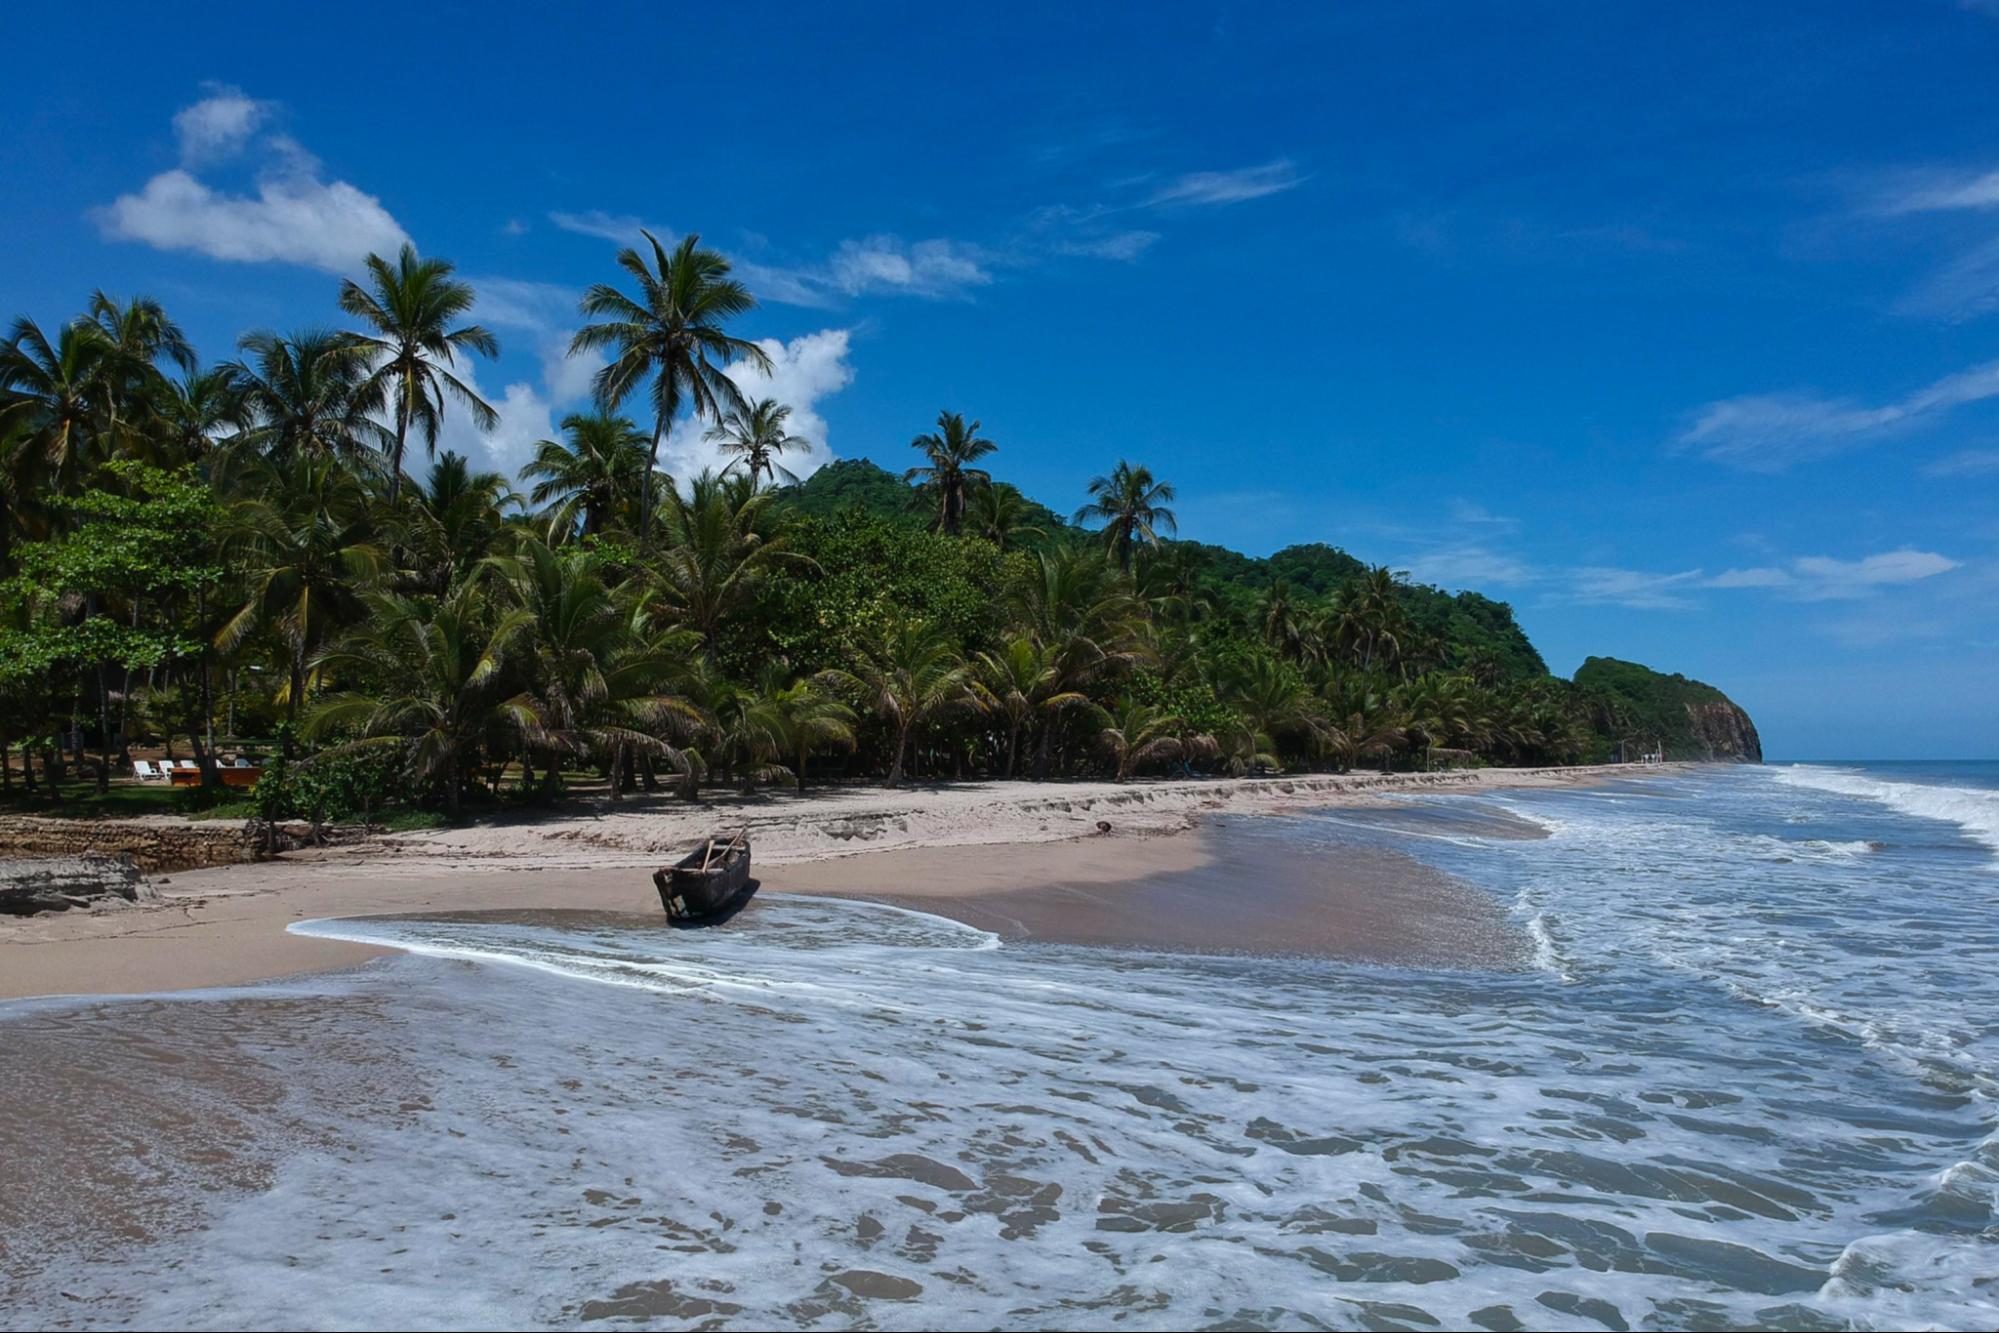 Beach Towns Without Beaches: Colombia Previews Our Future